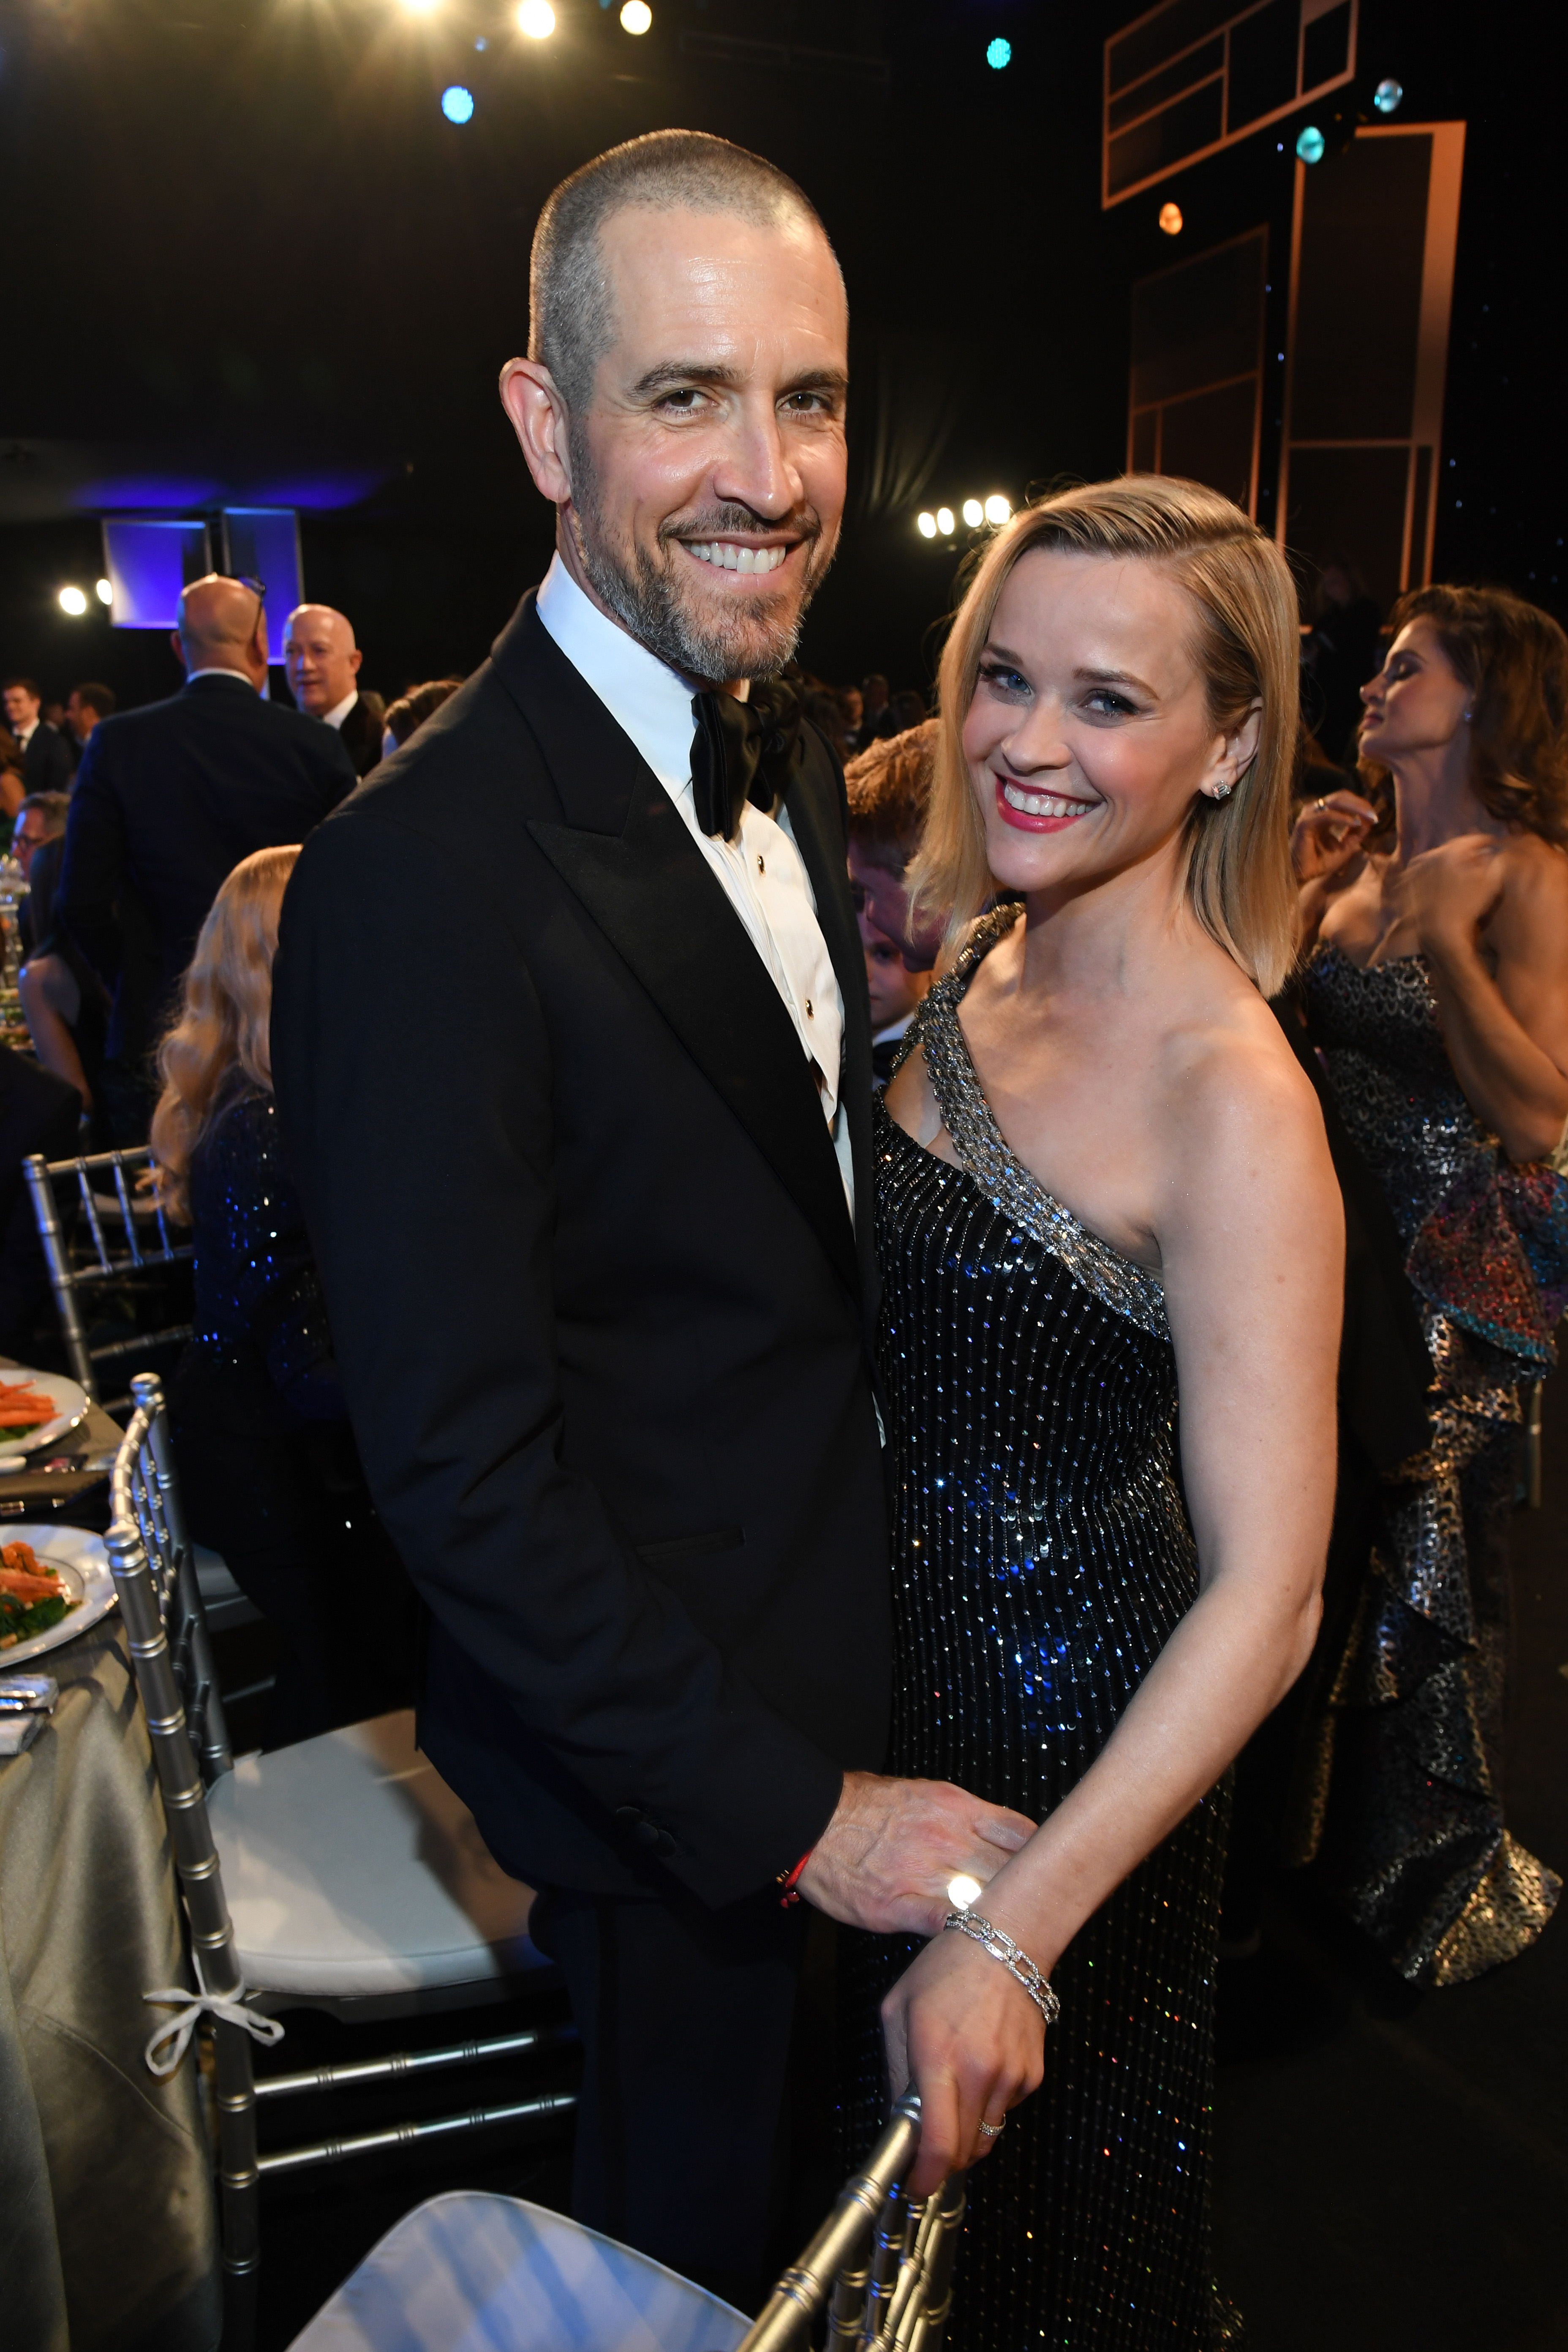 Jim Toth and Reese Witherspoon at The Shrine Auditorium on January 19, 2020, in Los Angeles, California. | Source: Getty Images